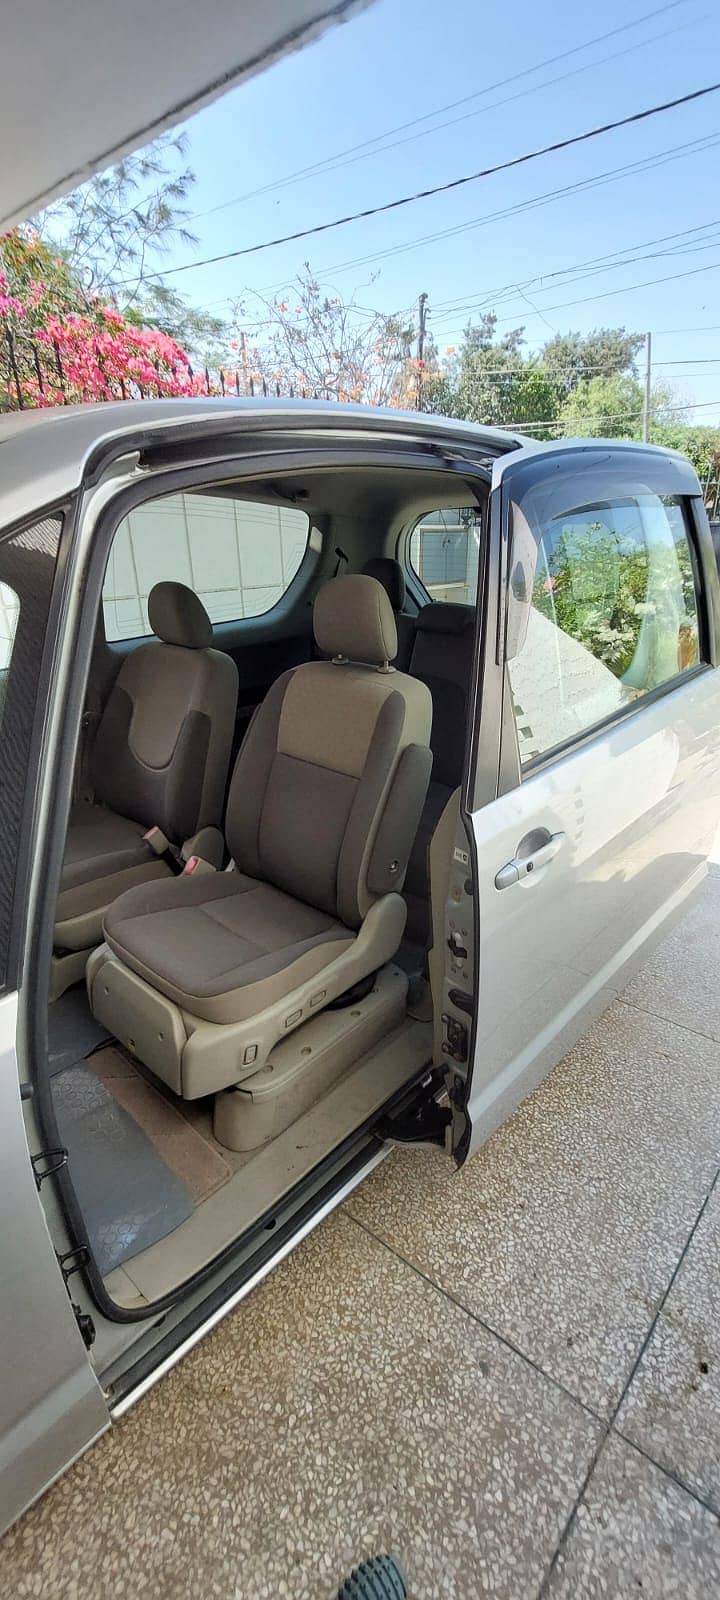 Toyota Porte 2011 with special seat for Disabled/Handicap persons 8